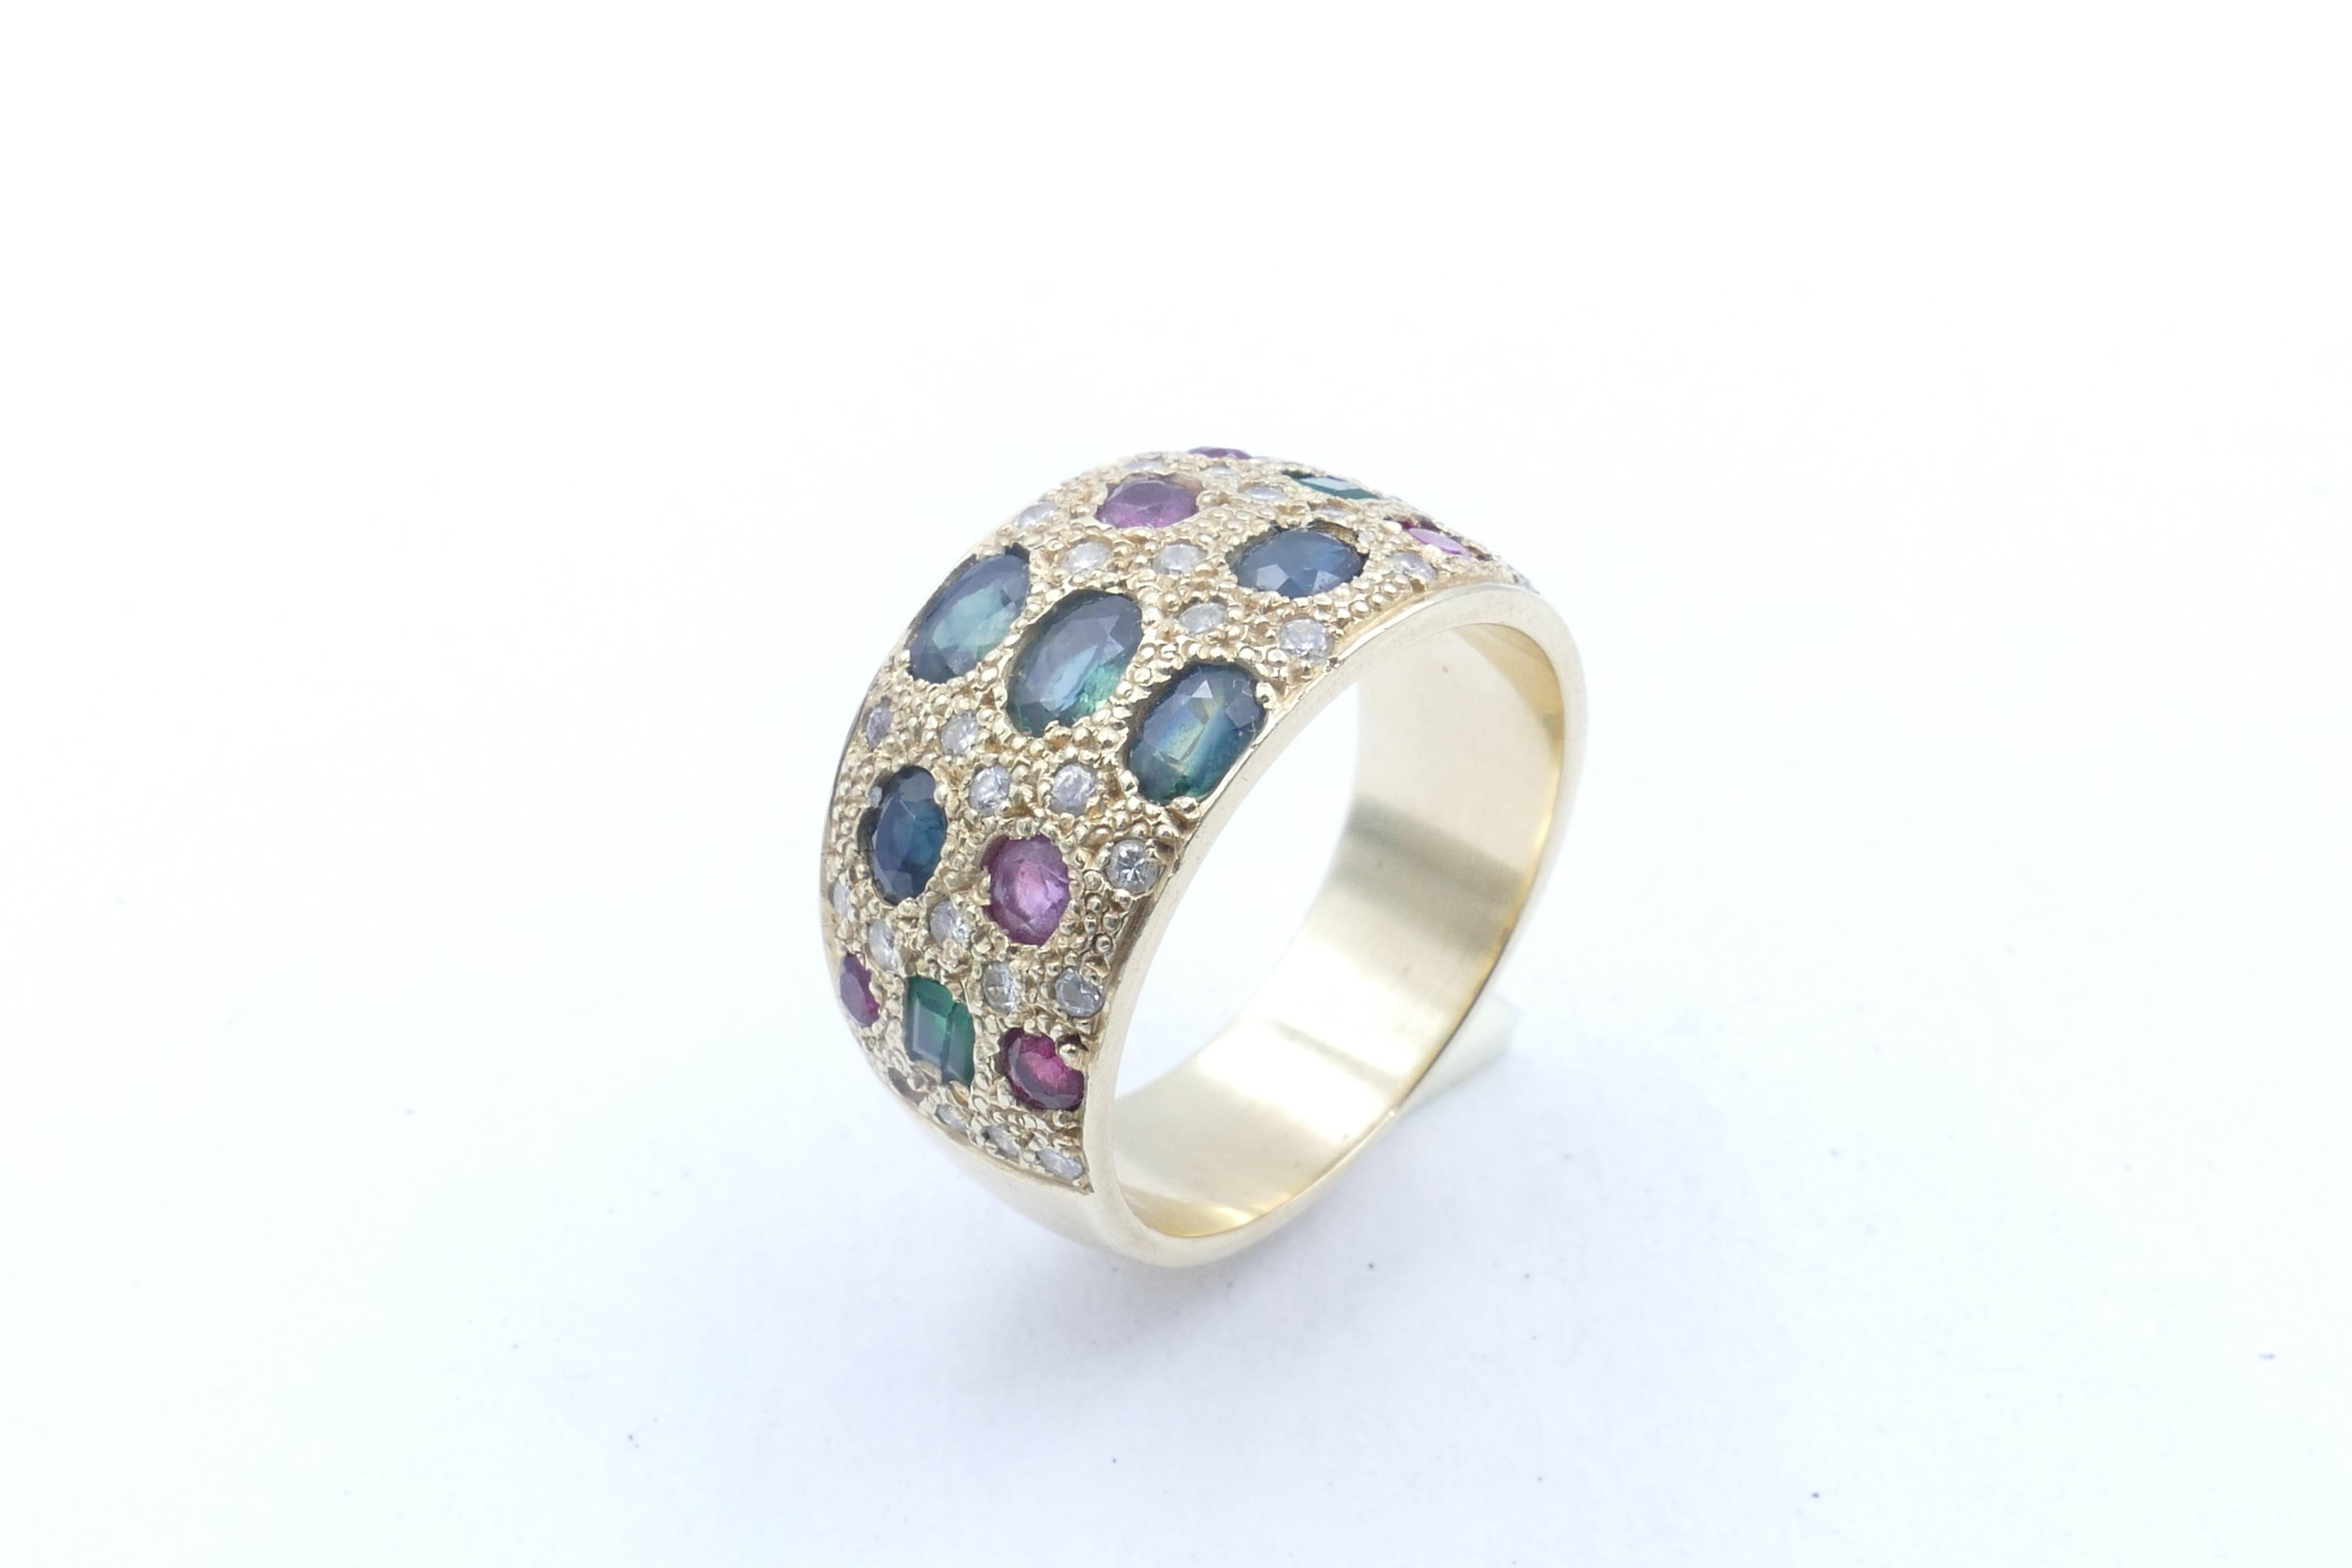 This gorgeous multi-colour Ring is, as well, studded with Diamonds, set in random pattern around the other Gemstones.
There are 5 Sapphires, Parti greenish blue, with 2 Emeralds of bluish green, as well as 6 Rubies, purplish red along with 30